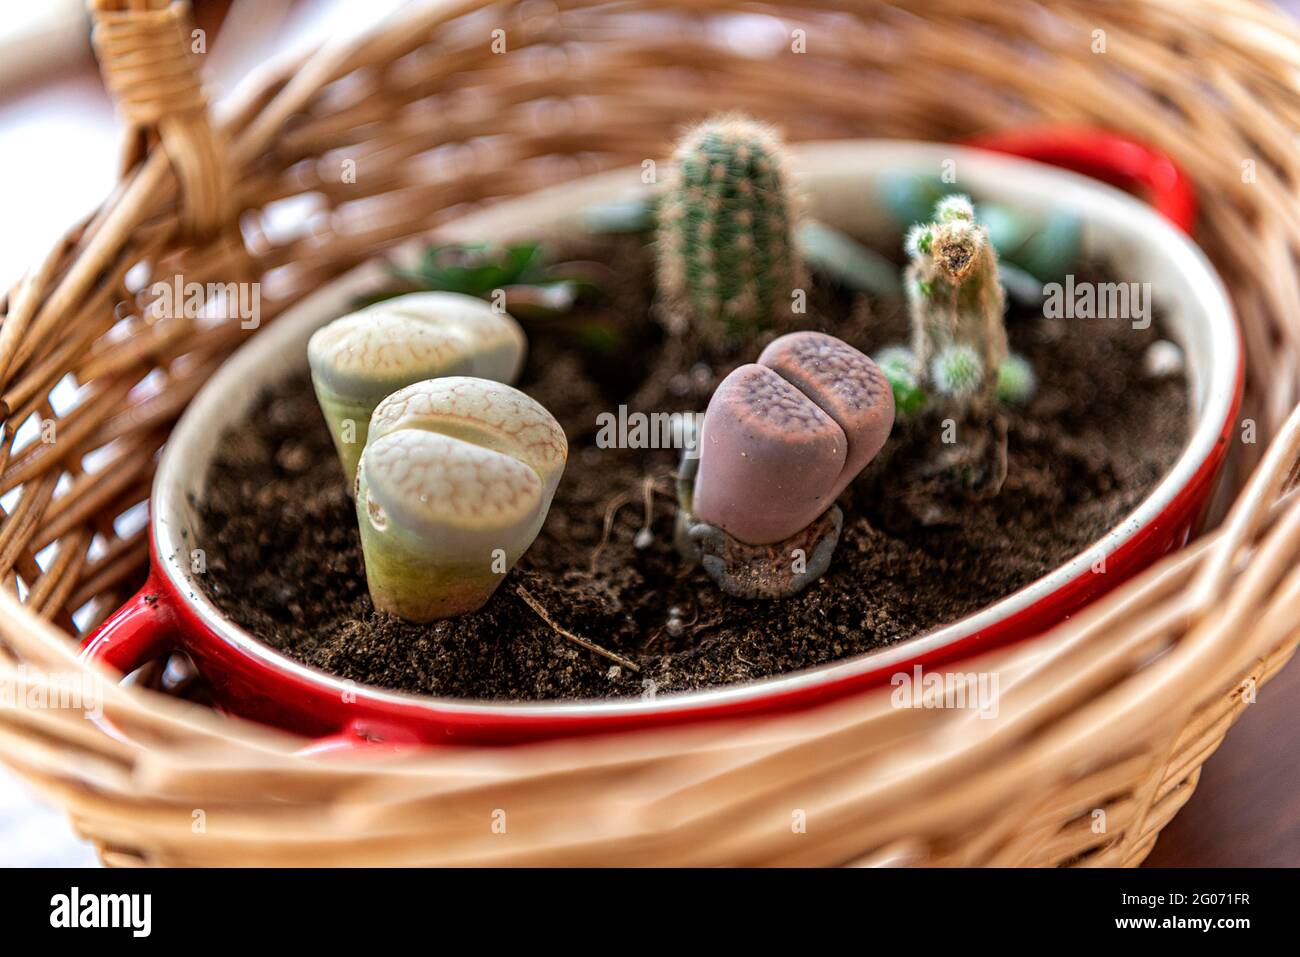 living stones aka Lithops decorated in a small basket Stock Photo